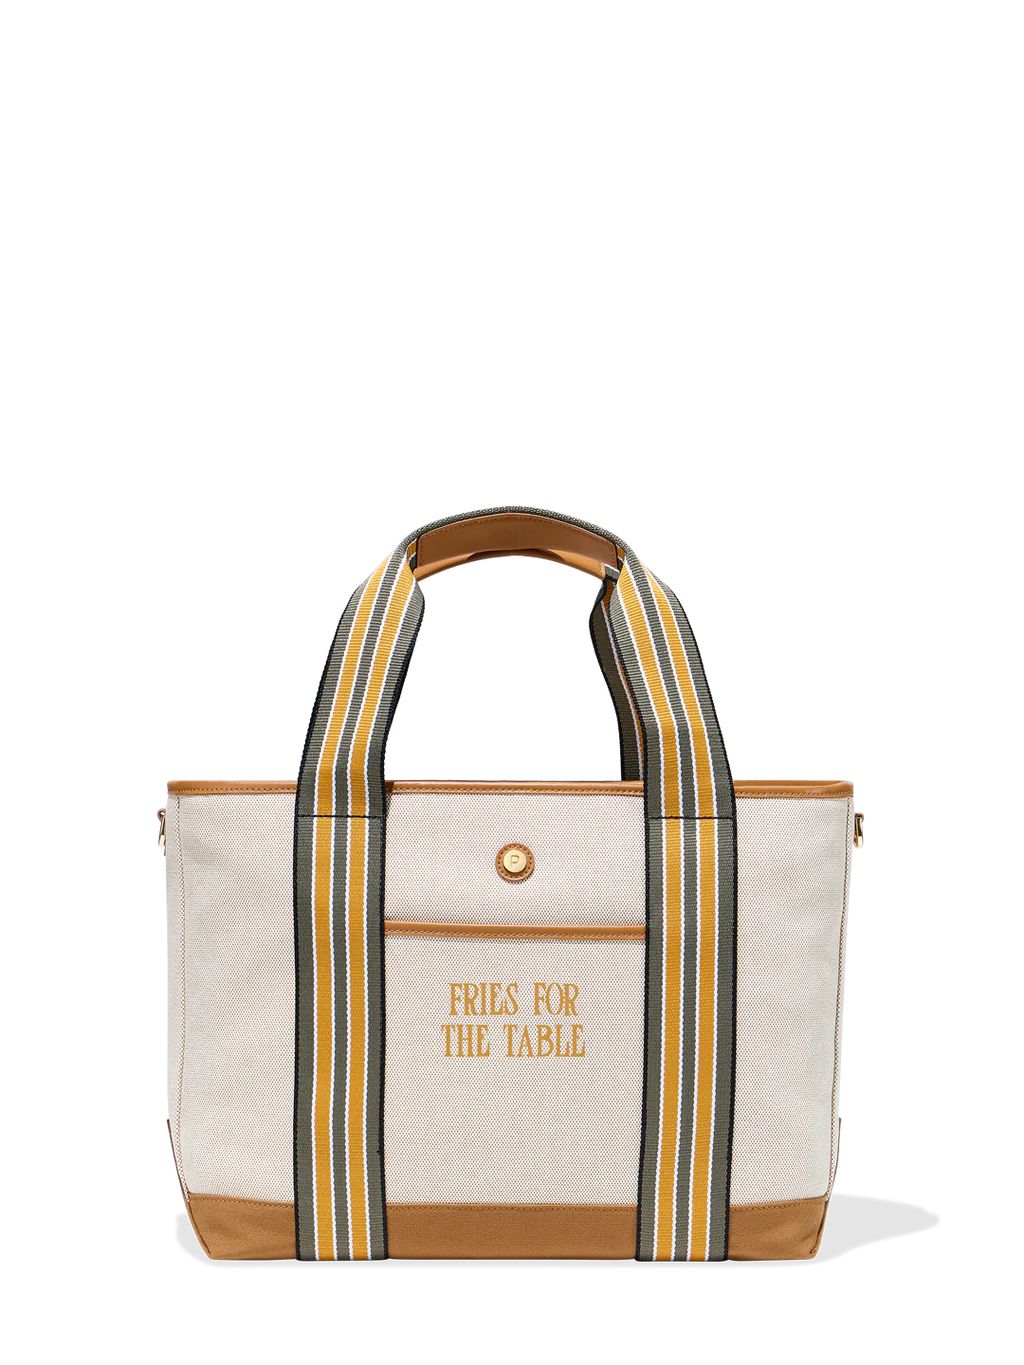 Medium Cabana Tote | Fries for the Table | Paravel